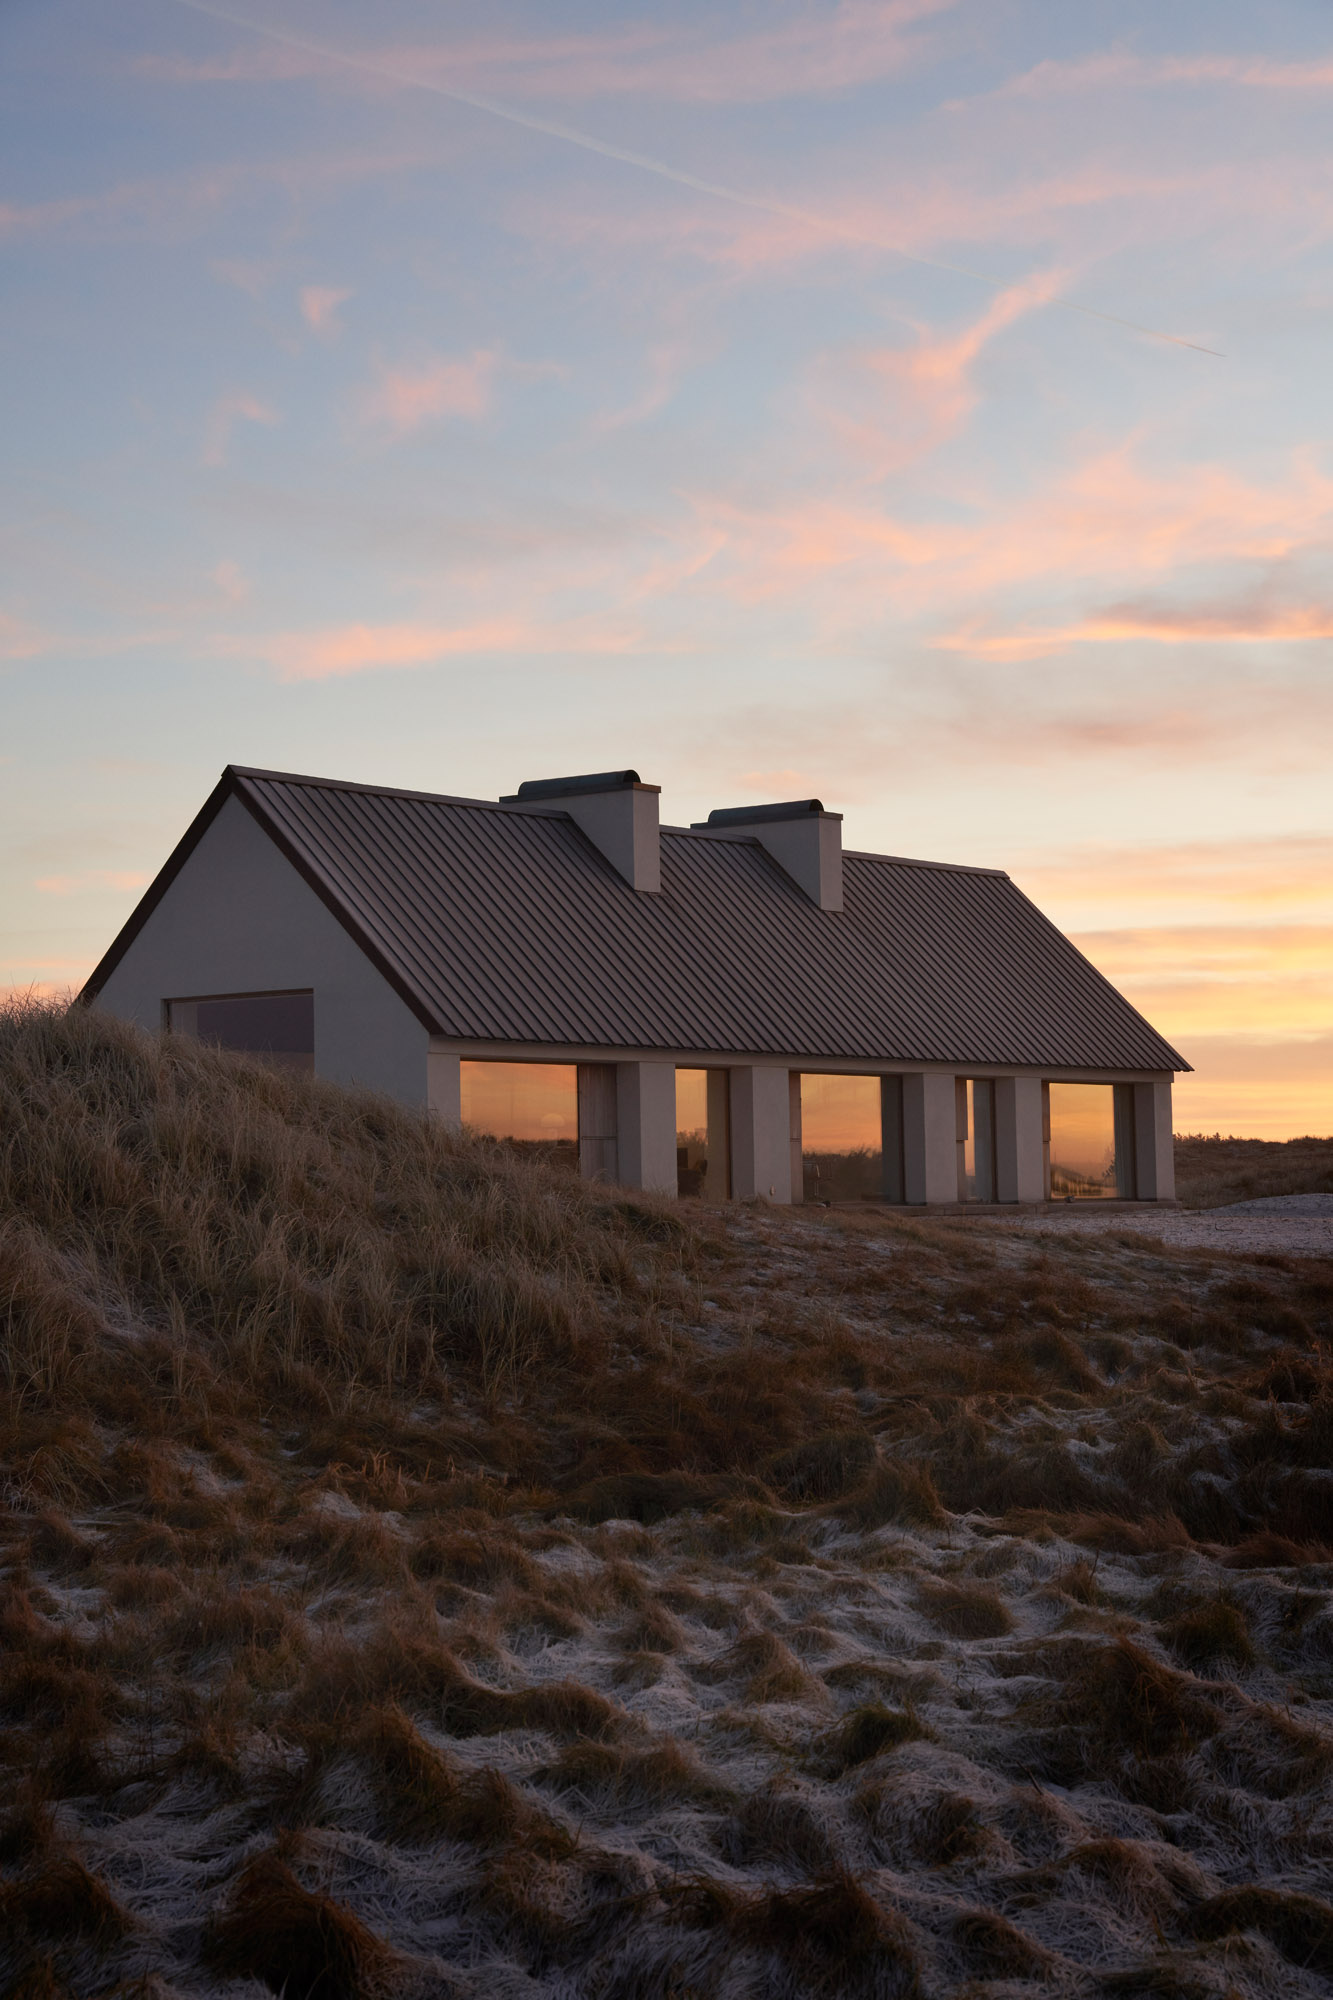 Vipp Cold Hawaii Guesthouse in Denmark’s Thy National Park